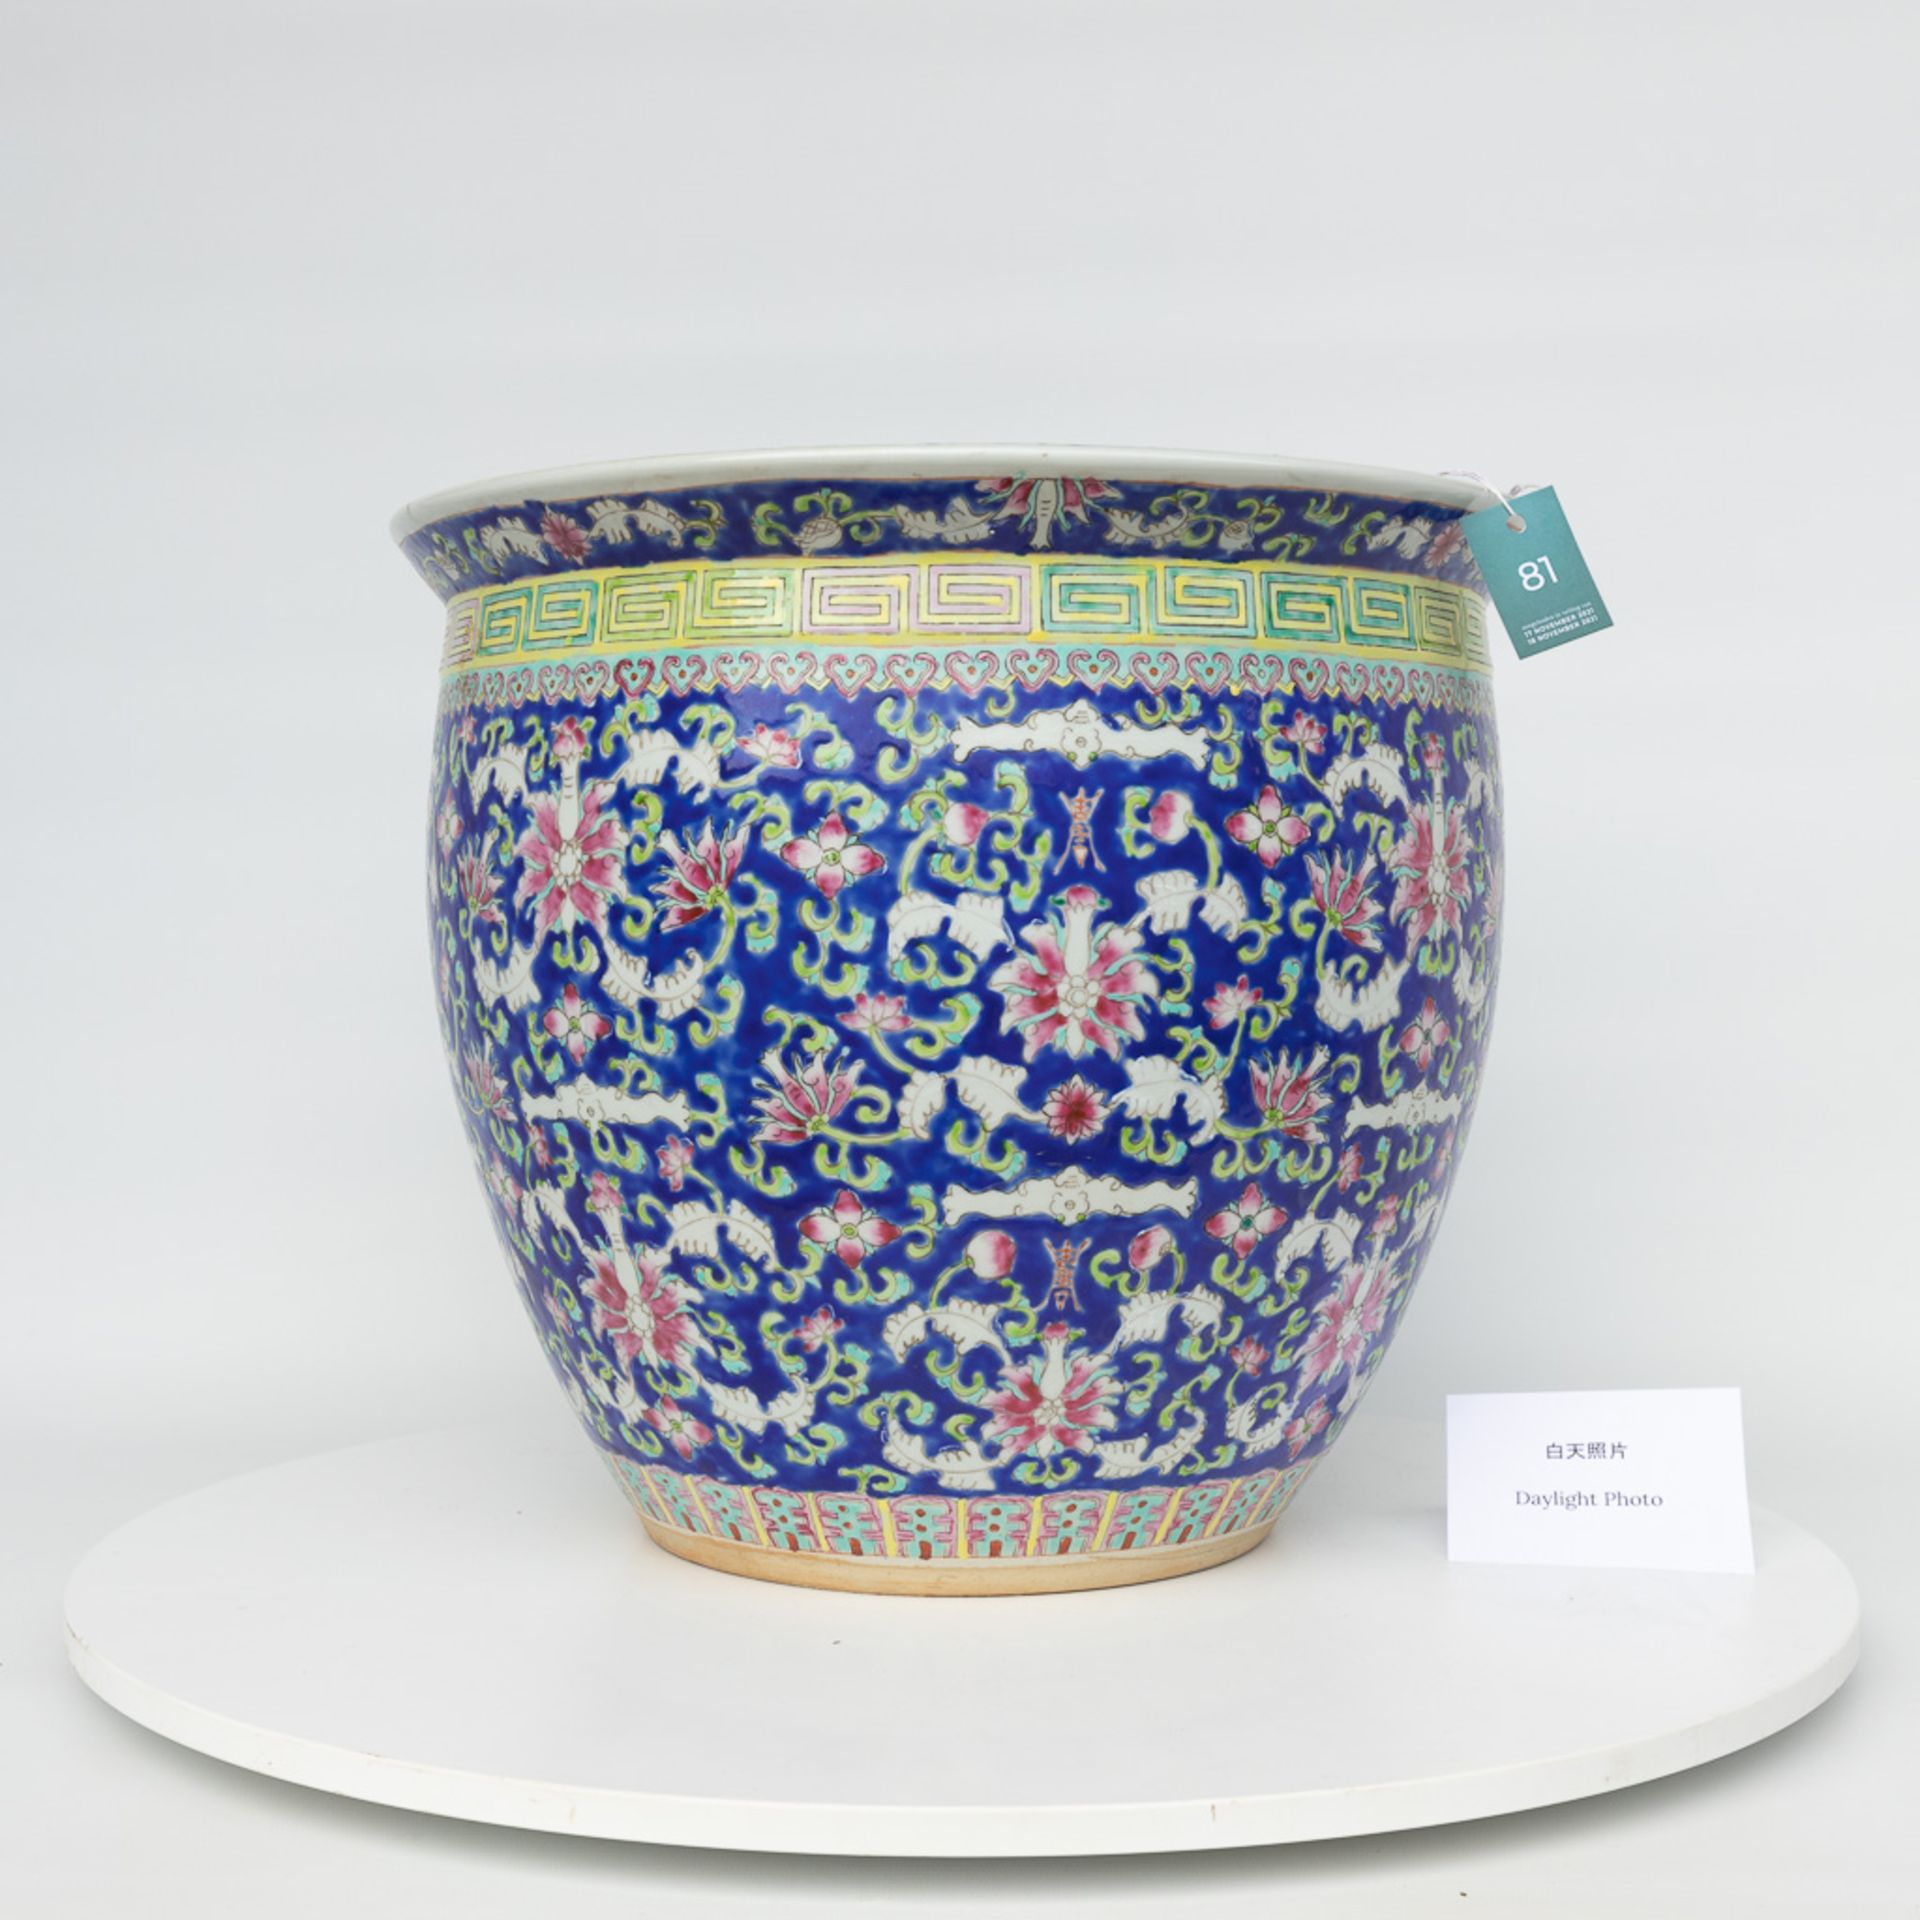 A large cache-pot made of Chinese porcelain and decorated with flowers - Image 8 of 10